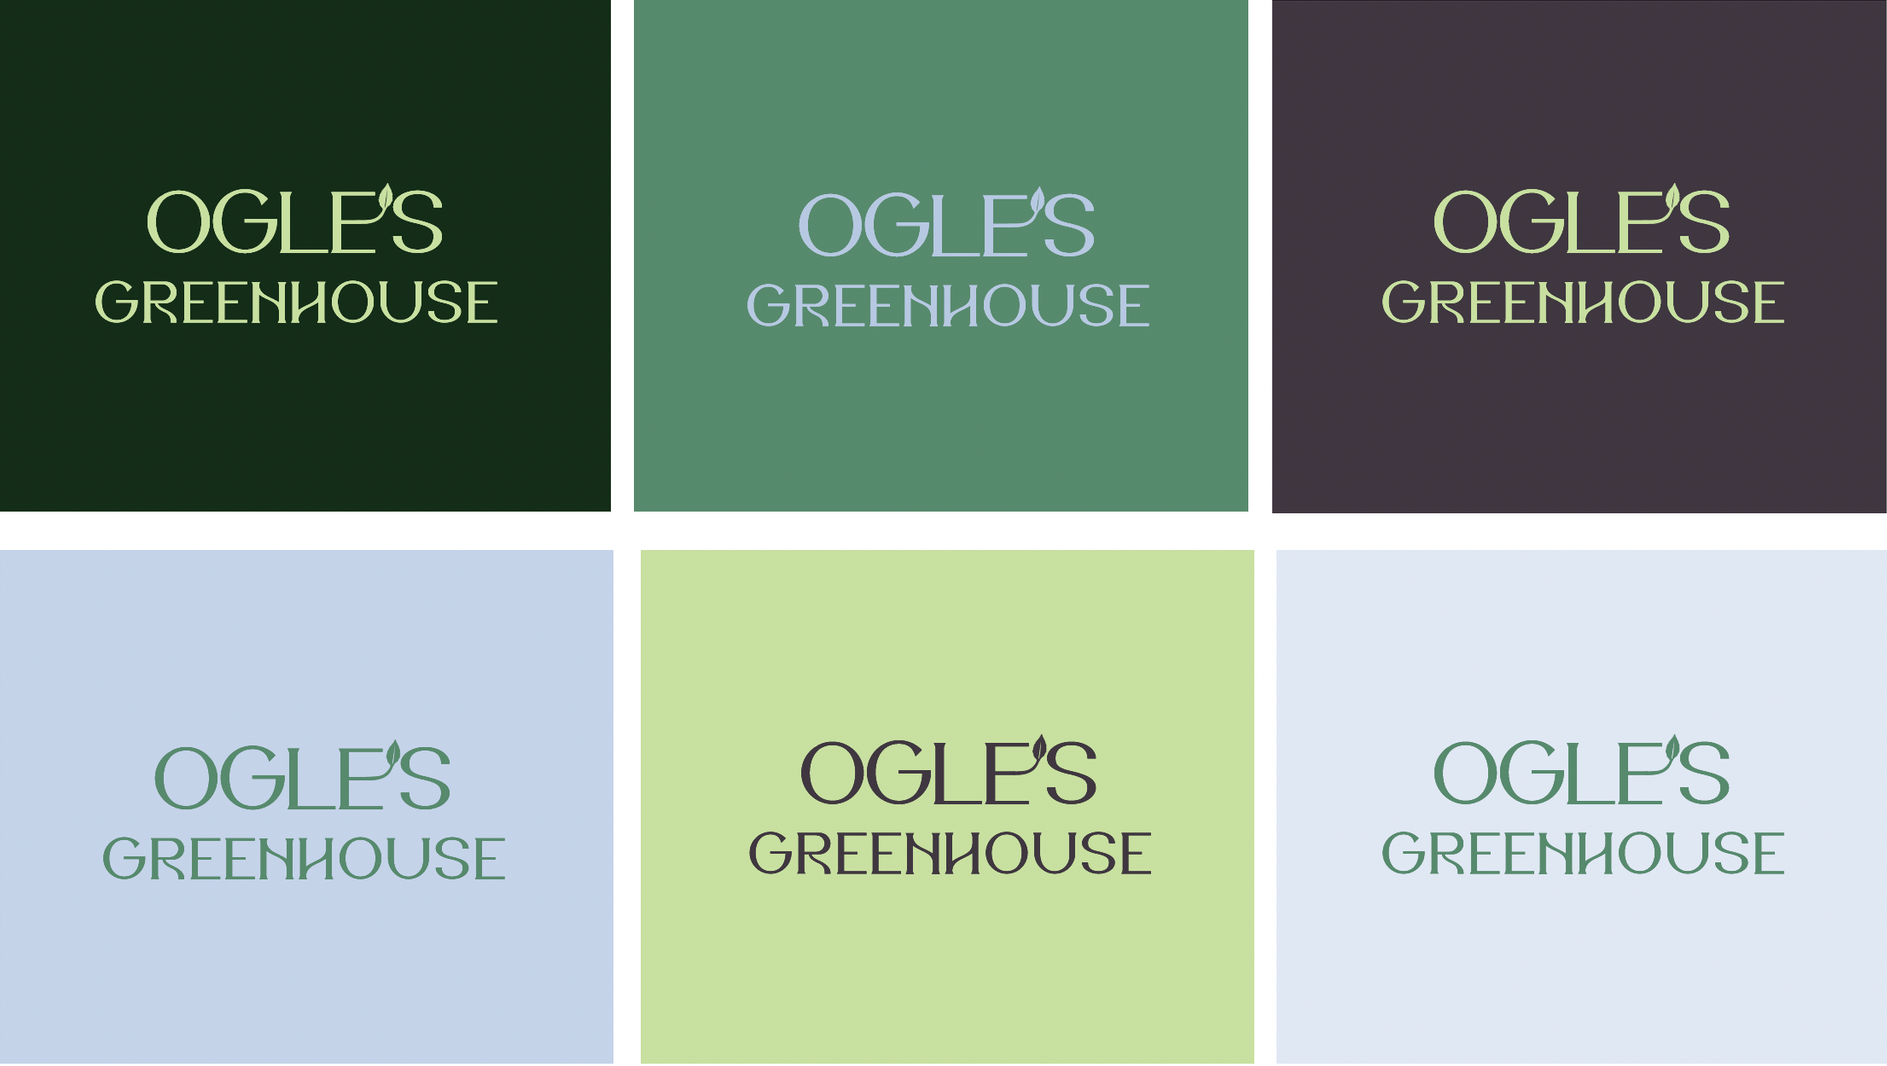 A collage of ogle 's greenhouse logos in different colors